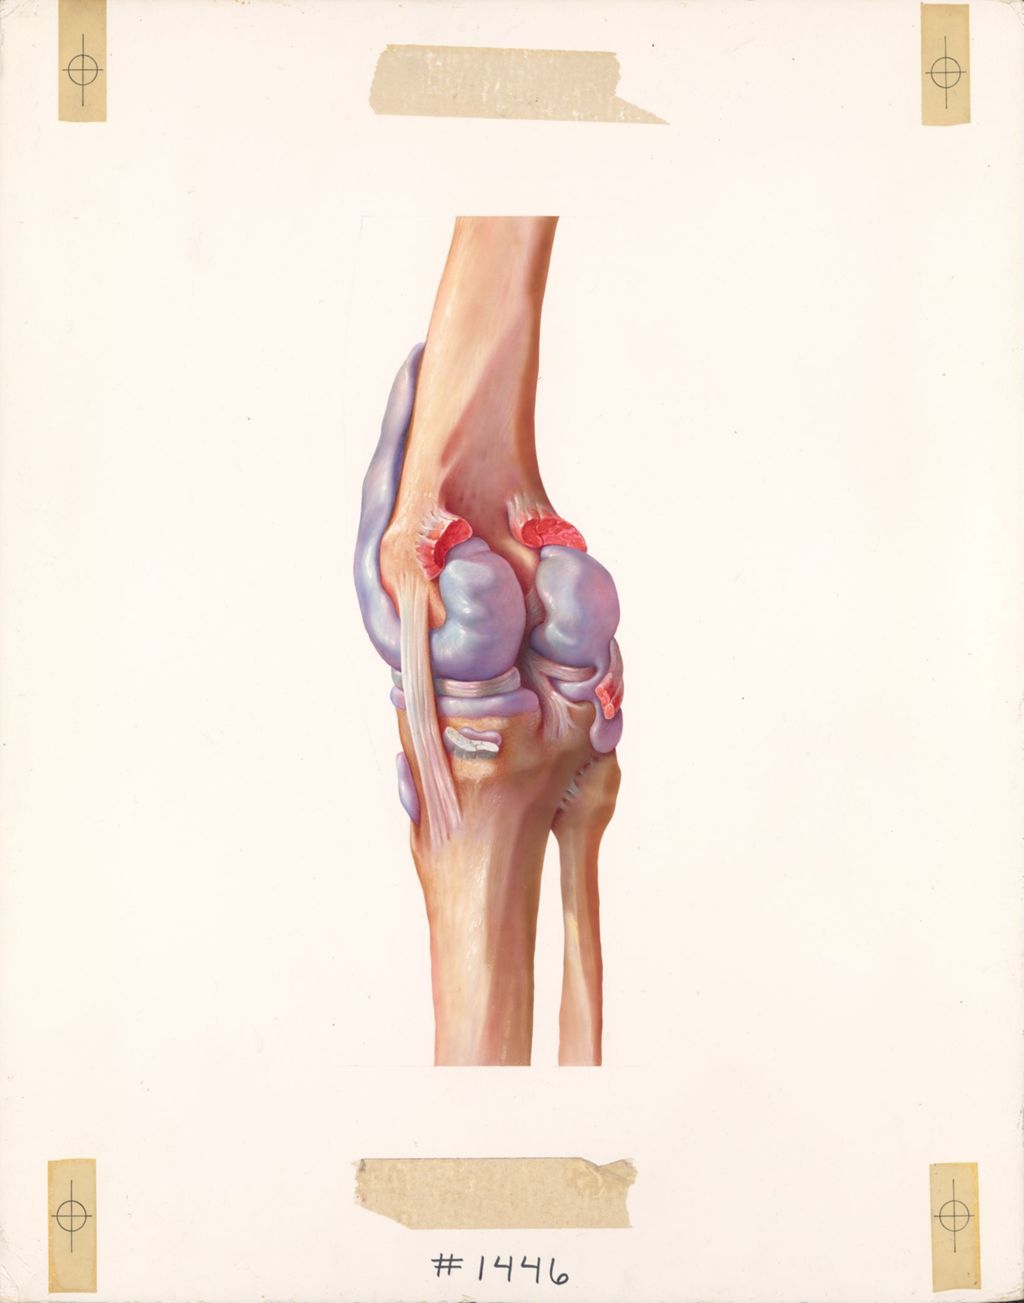 The knee, the synovial and bursae of the knee, posteromedial aspect